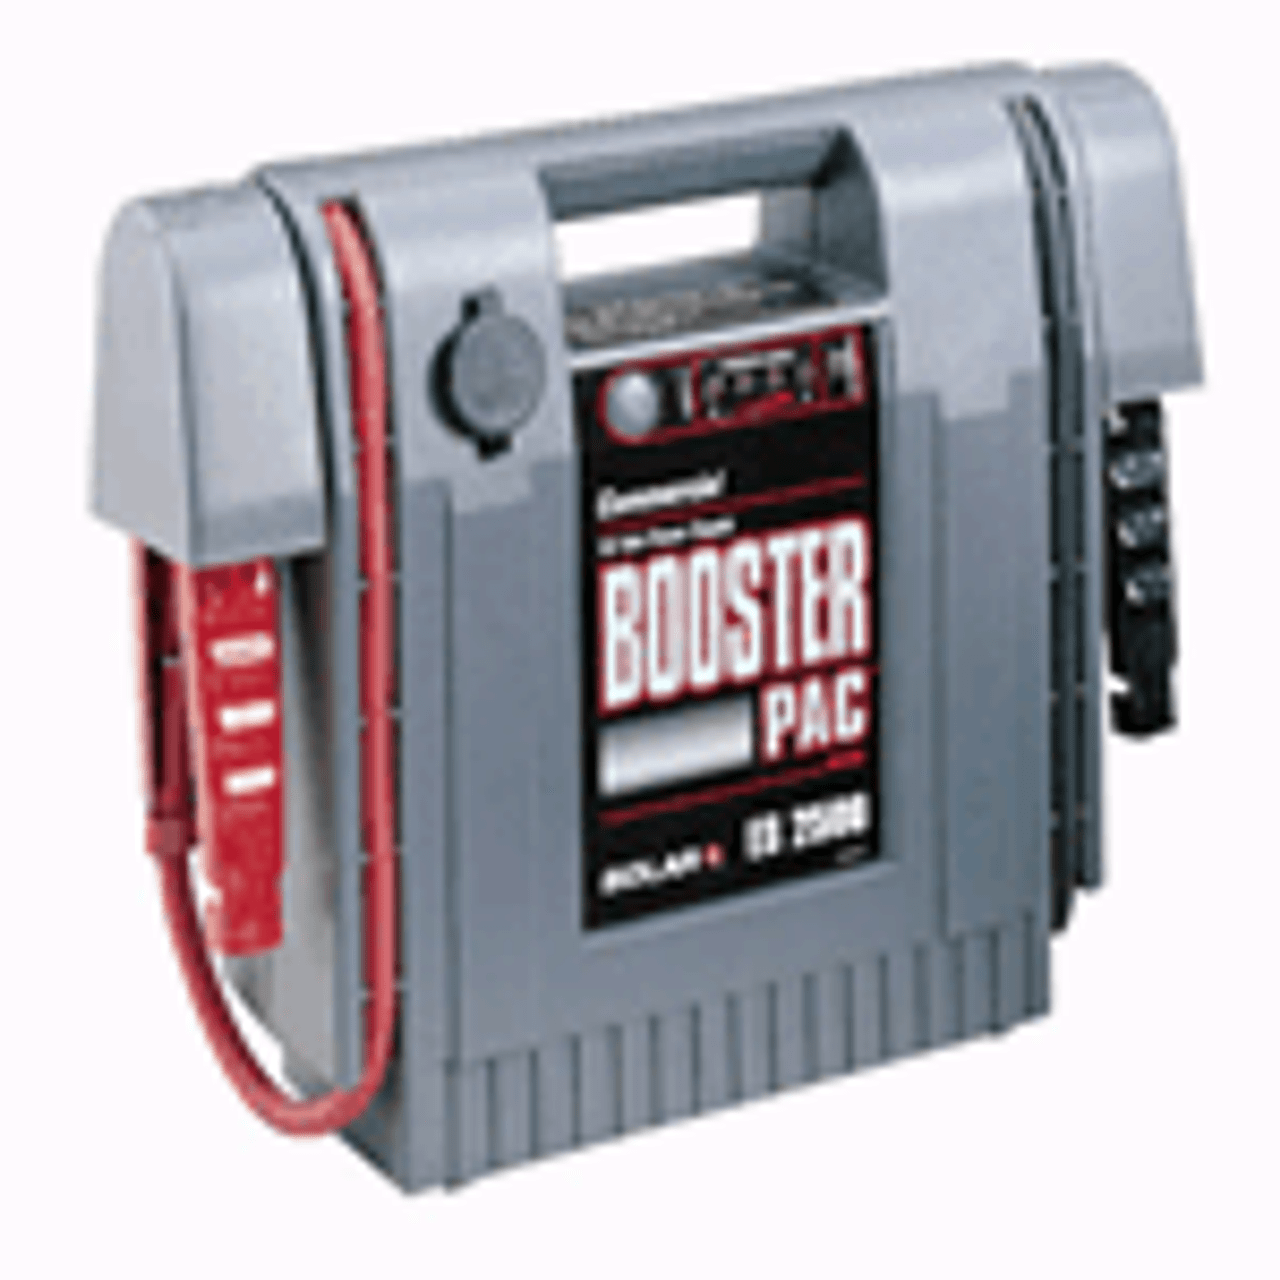 Solar Booster Pac ES2500 Jump Starter Replacement Battery by SigmasTek